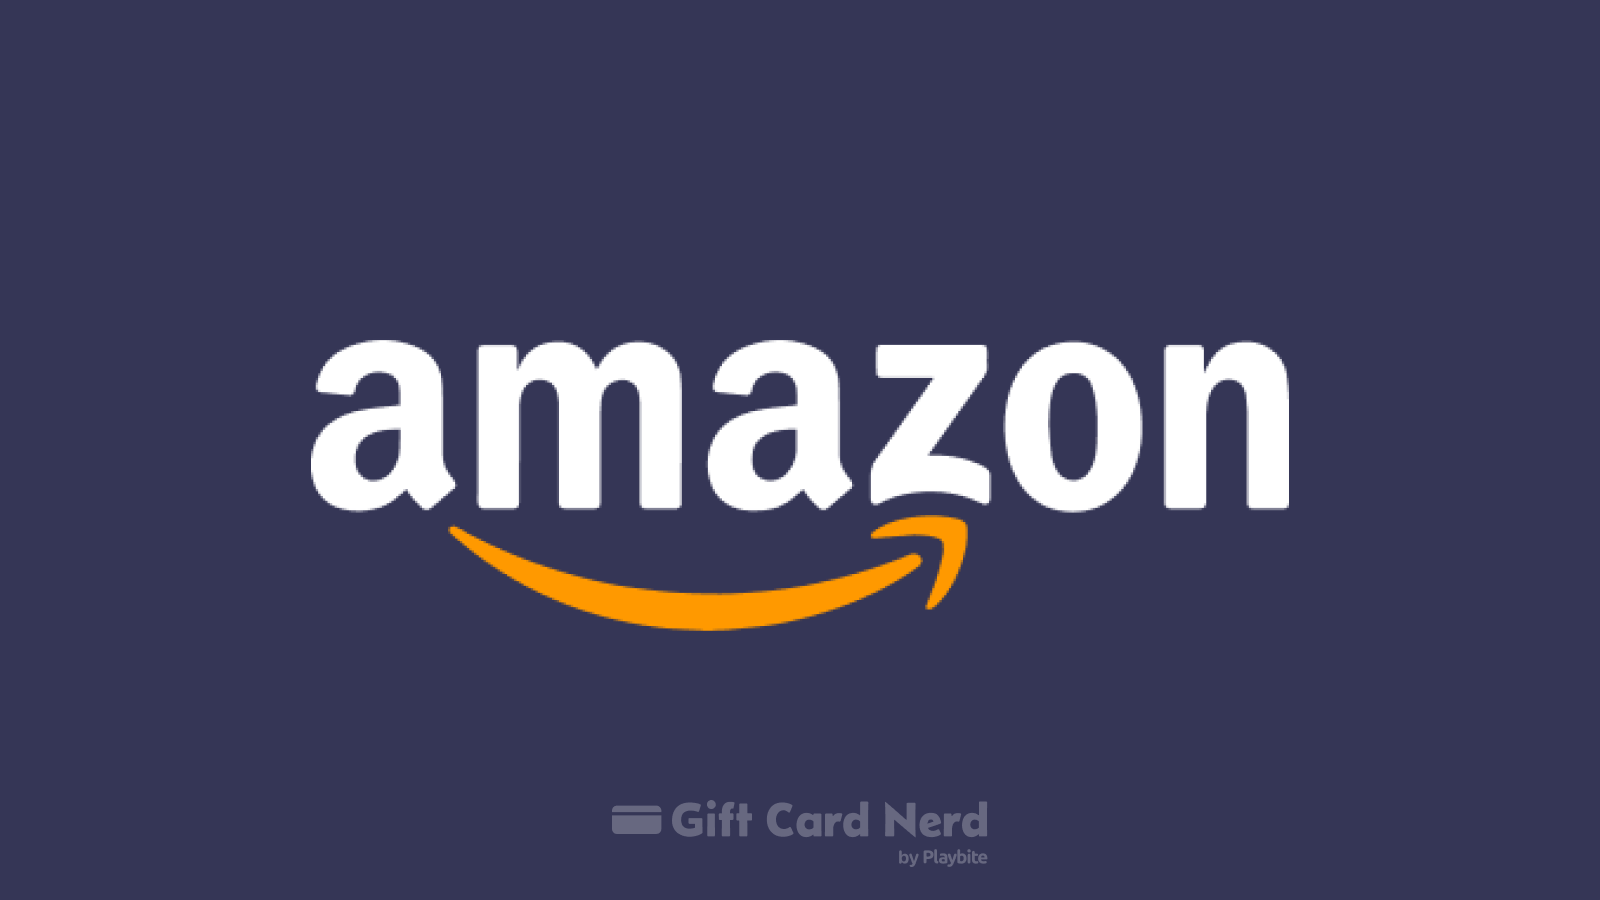 Can You Find Amazon Gift Cards at Target?